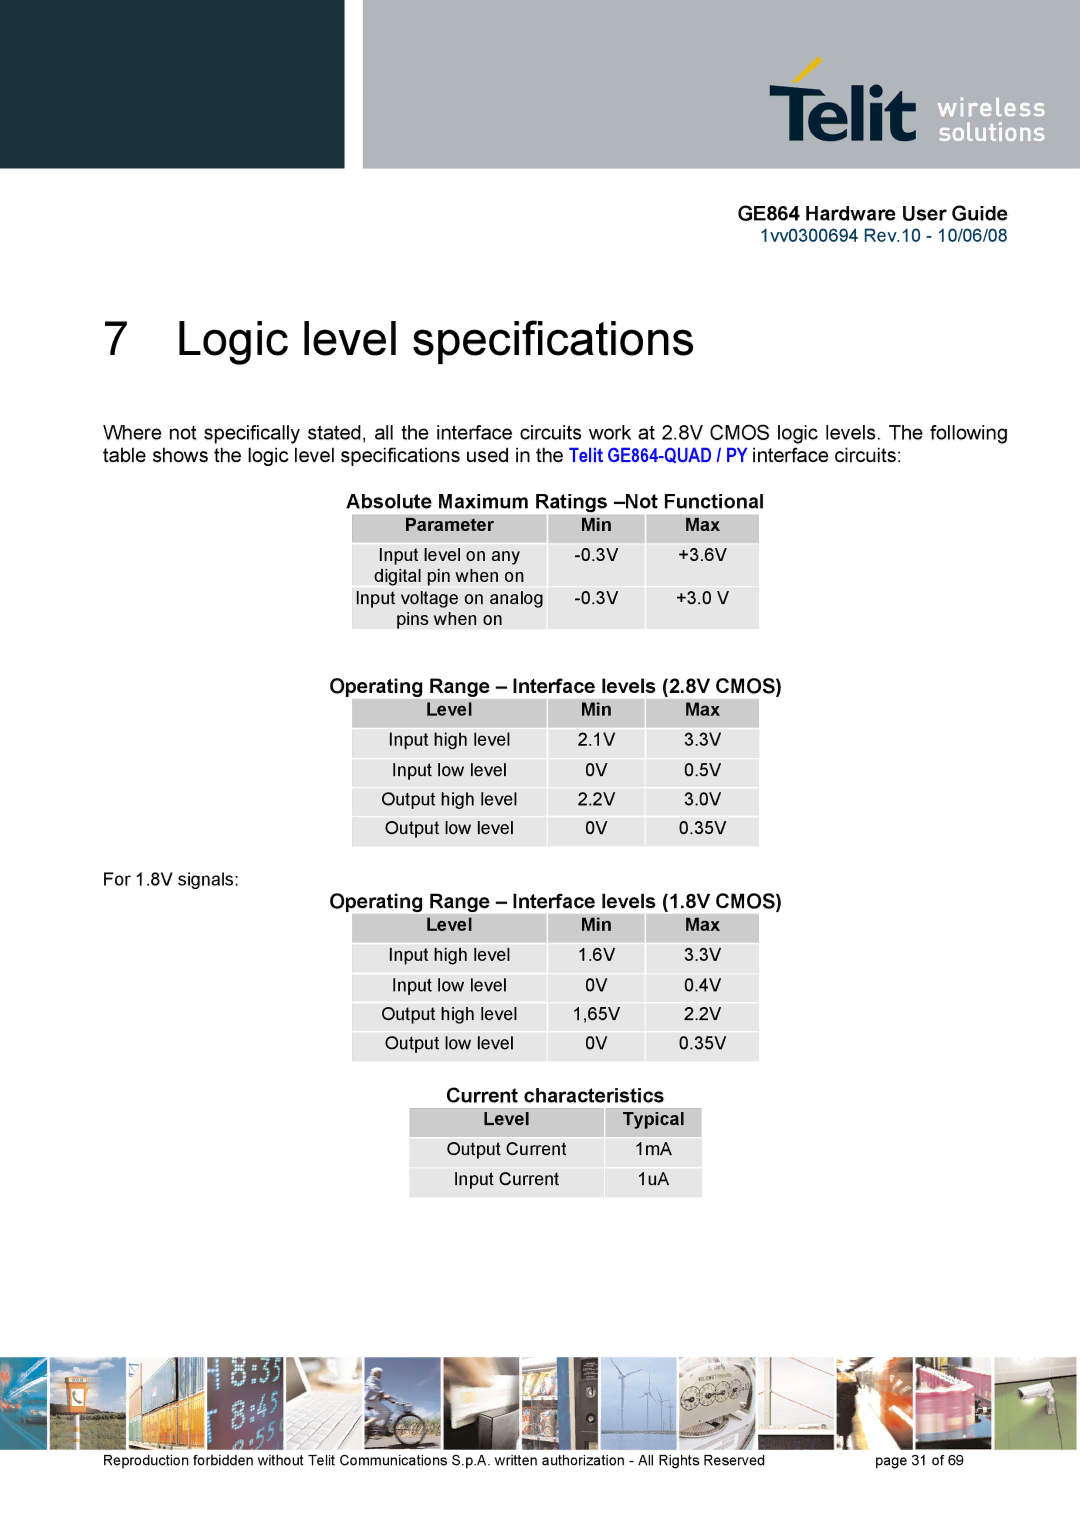 Telit Wireless Solutions GE864 manual Logic level specifications, Absolute Maximum Ratings -Not Functional 